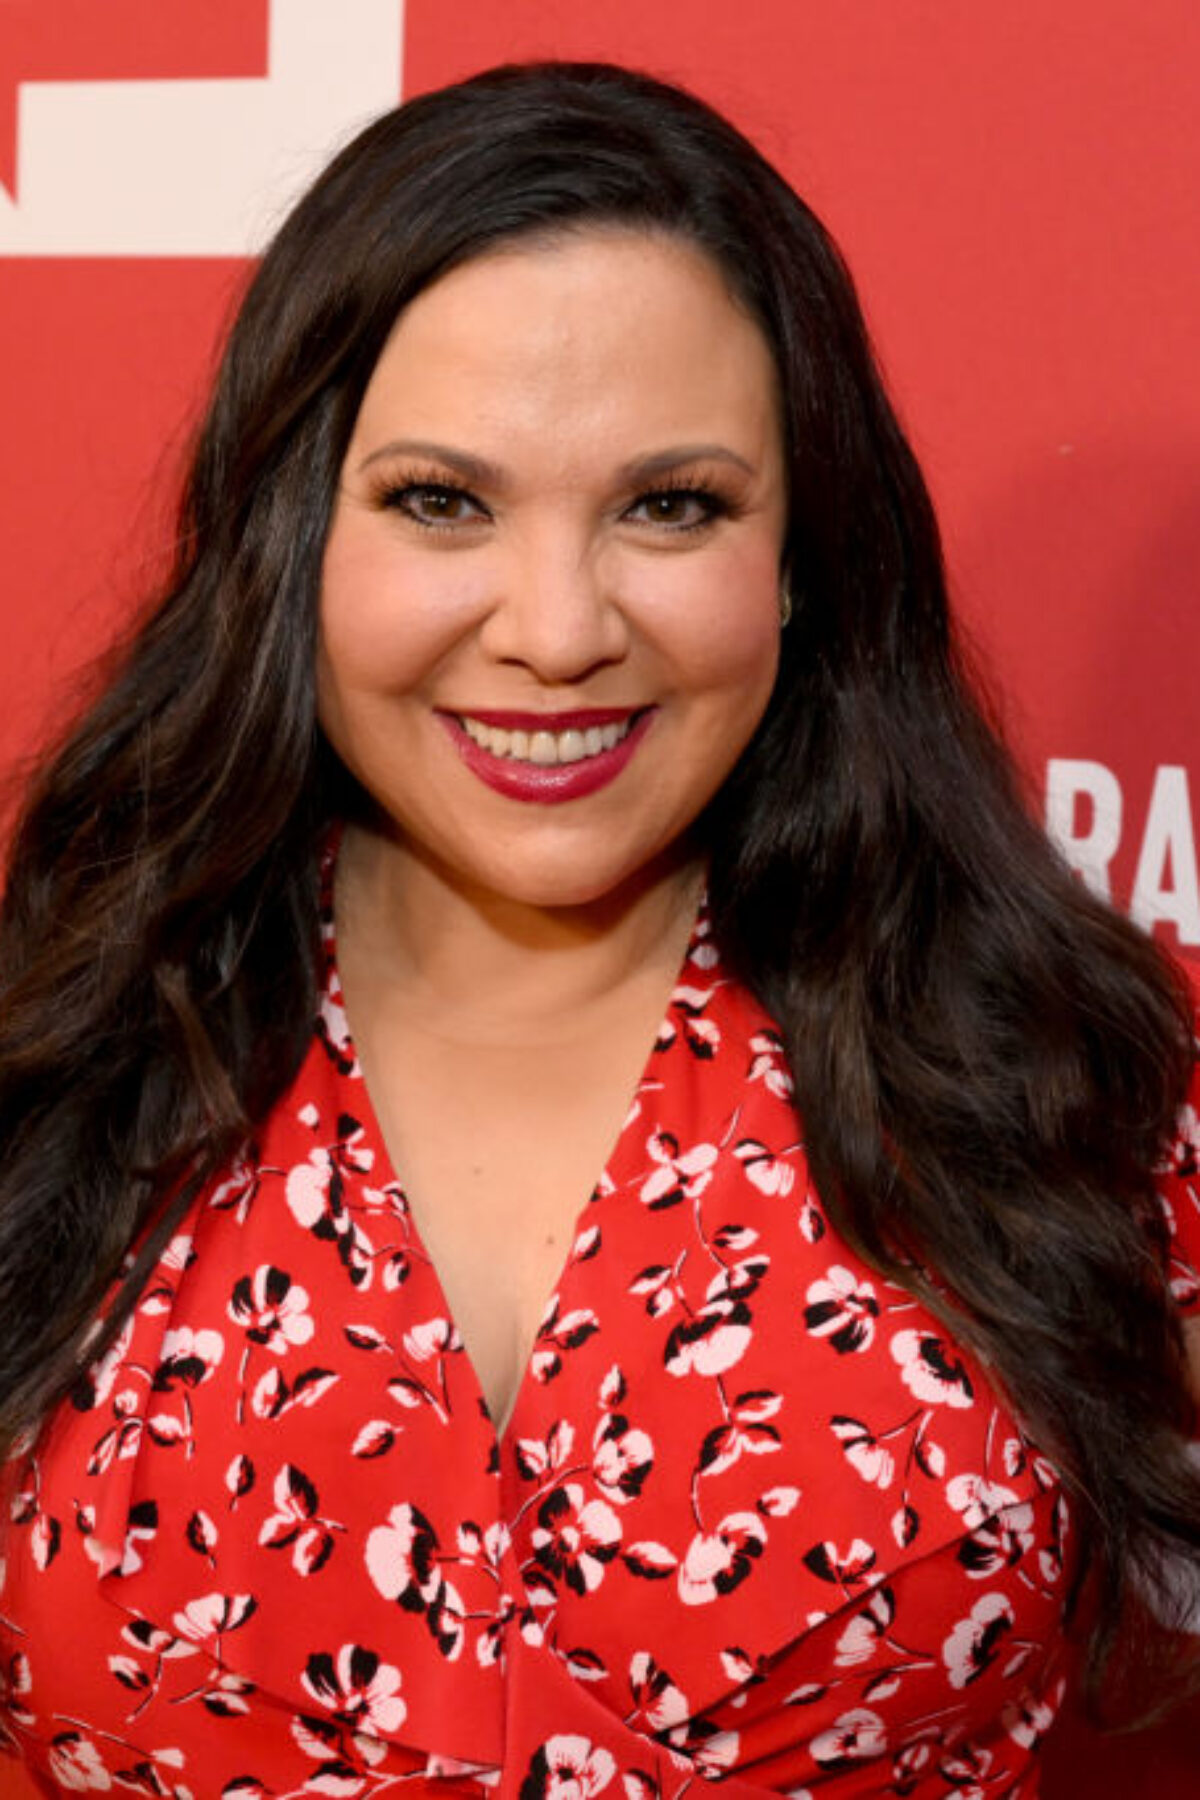 BEVERLY HILLS, CALIFORNIA - APRIL 20: Gloria Calderón Kellett attends The Hollywood Reporter's Raising Our Voices, presented by Walmart, at The Maybourne Beverly Hills on April 20, 2022 in Beverly Hills, California. (Photo by Michael Kovac/Getty Images for The Hollywood Reporter )